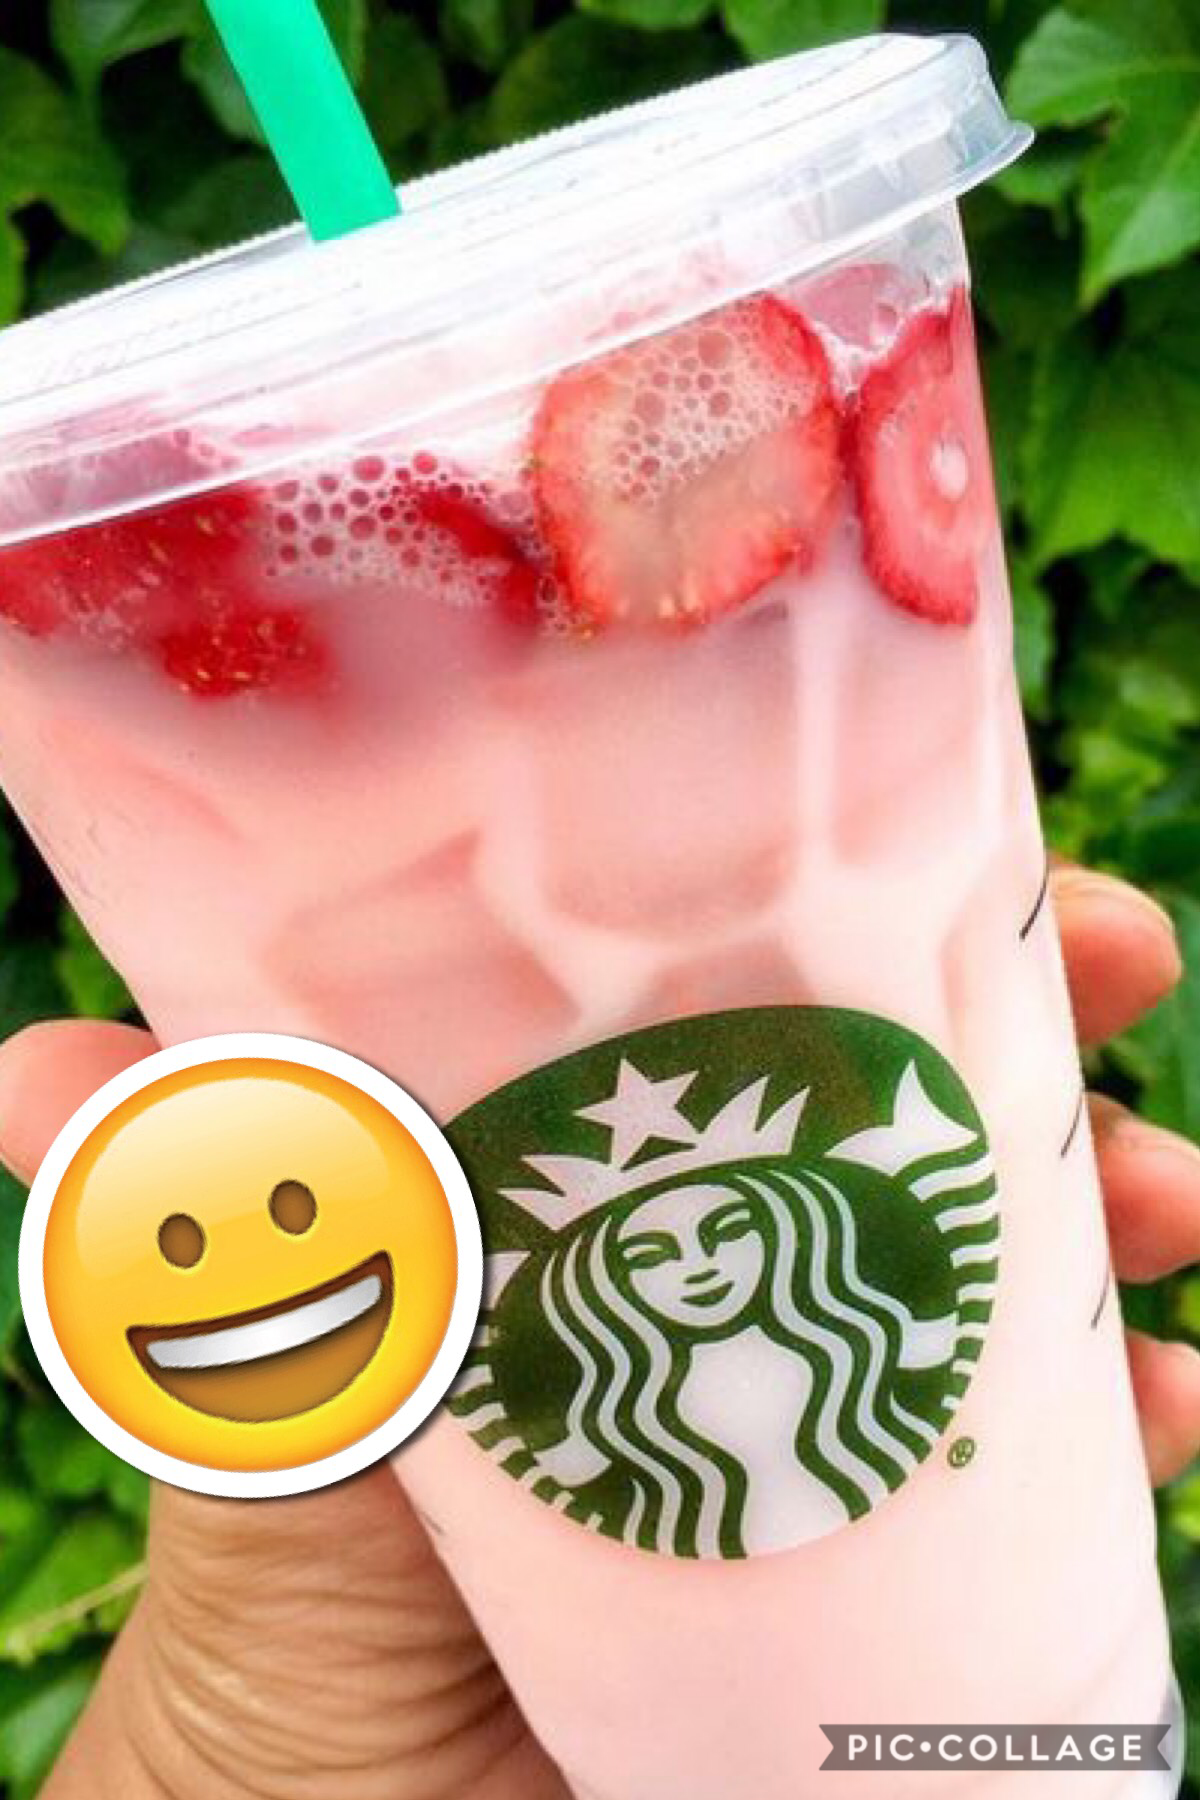 Starbucks! What's you fave? Mine straberry! 